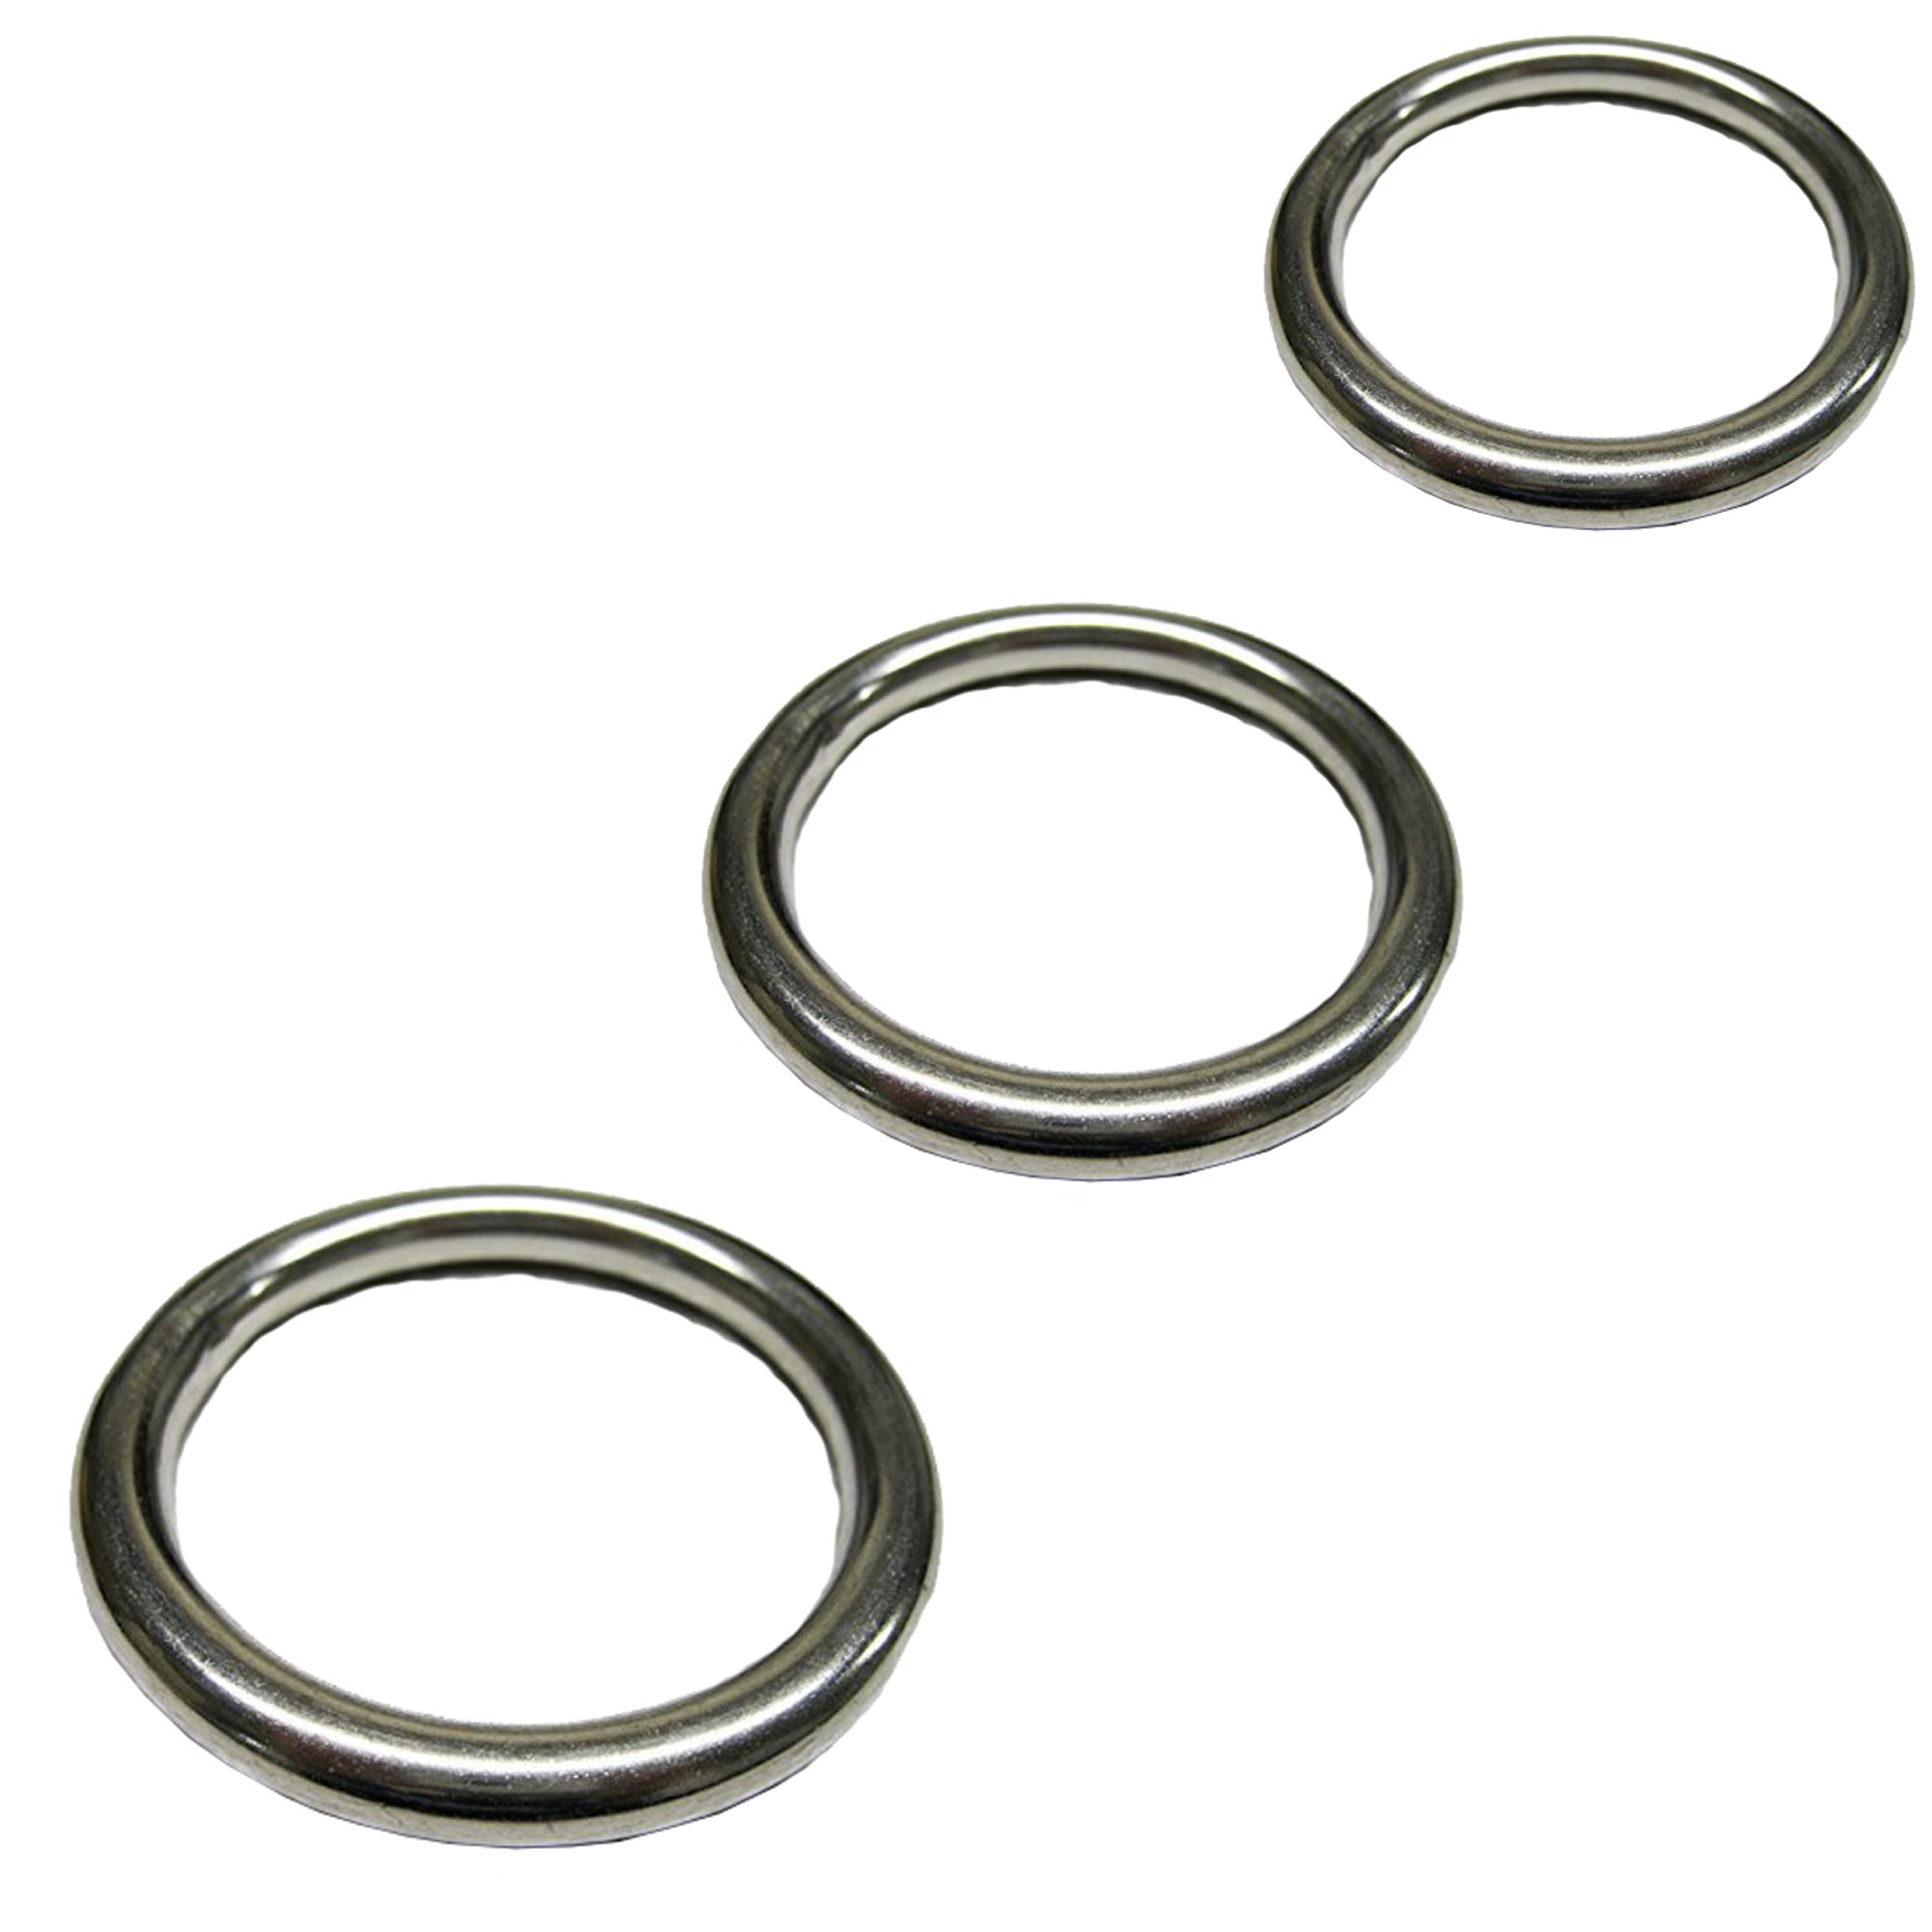 Stainless Steel O-Rings - Rutgerson Marin